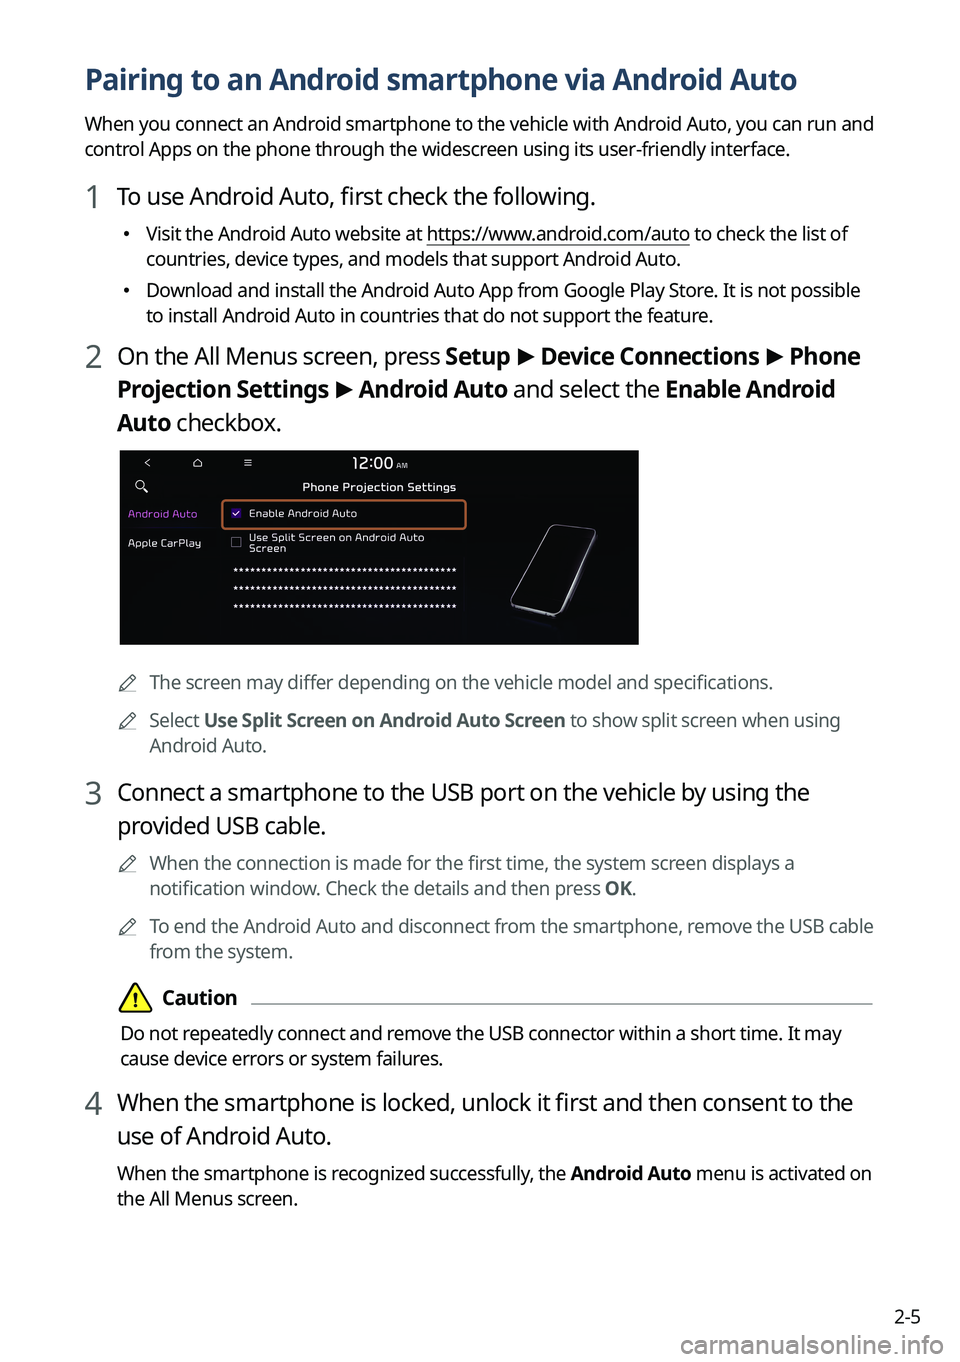 KIA SPORTAGE PHEV 2023  Navigation System Quick Reference Guide 2-5
Pairing to an Android smartphone via Android Auto
When you connect an Android smartphone to the vehicle with Android Auto, you can run and 
control Apps on the phone through the widescreen using i